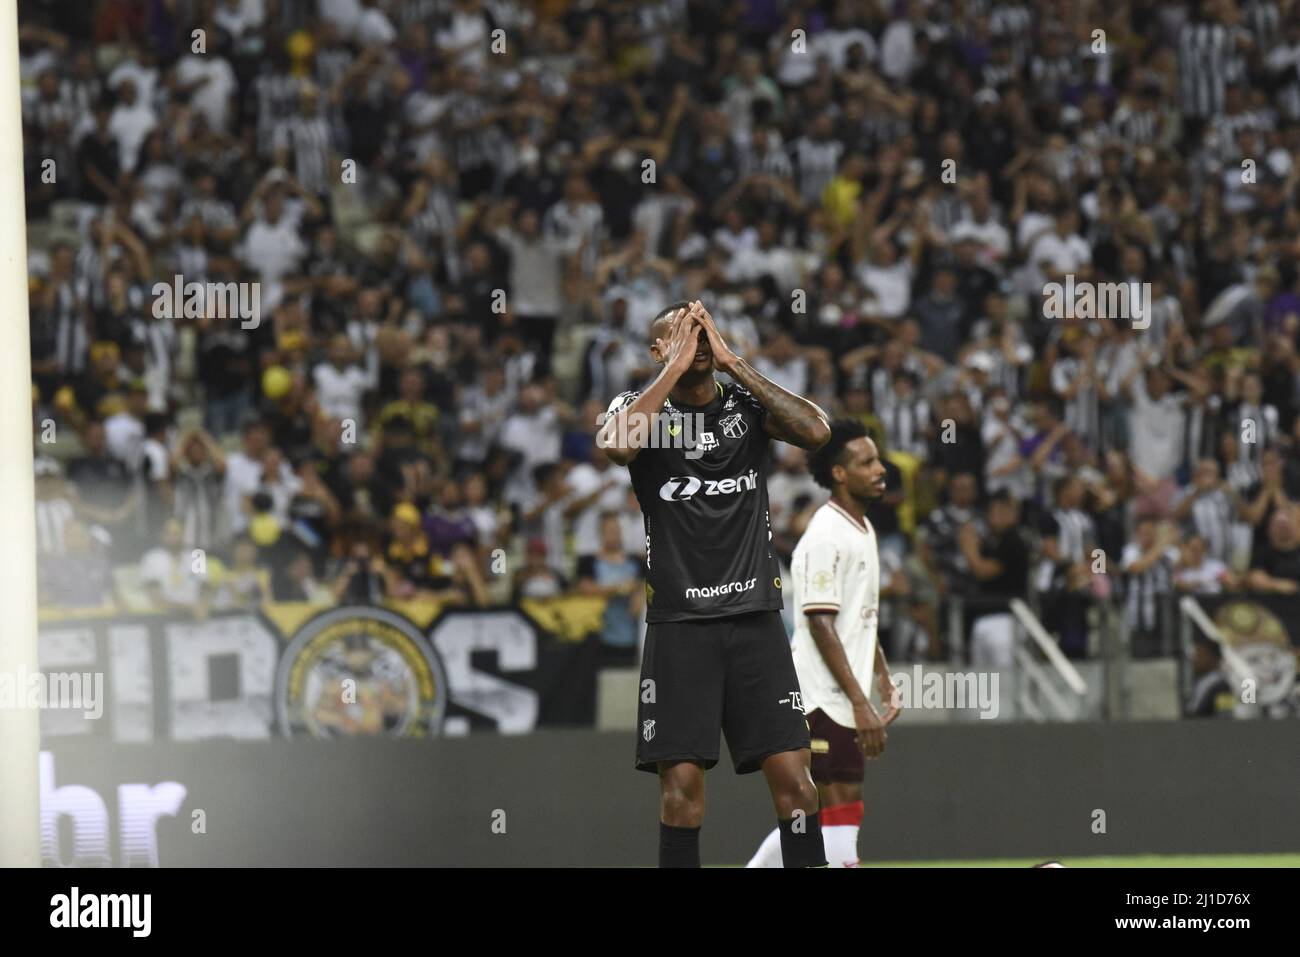 Fortaleza, Brazil. 24th Mar, 2022. Cleber of Ceara during the Copa do Nordeste football game between Ceara v CRB at the Arena Castelao, Fortaleza, Brazil. Caior Rocha/SPP Credit: SPP Sport Press Photo. /Alamy Live News Stock Photo